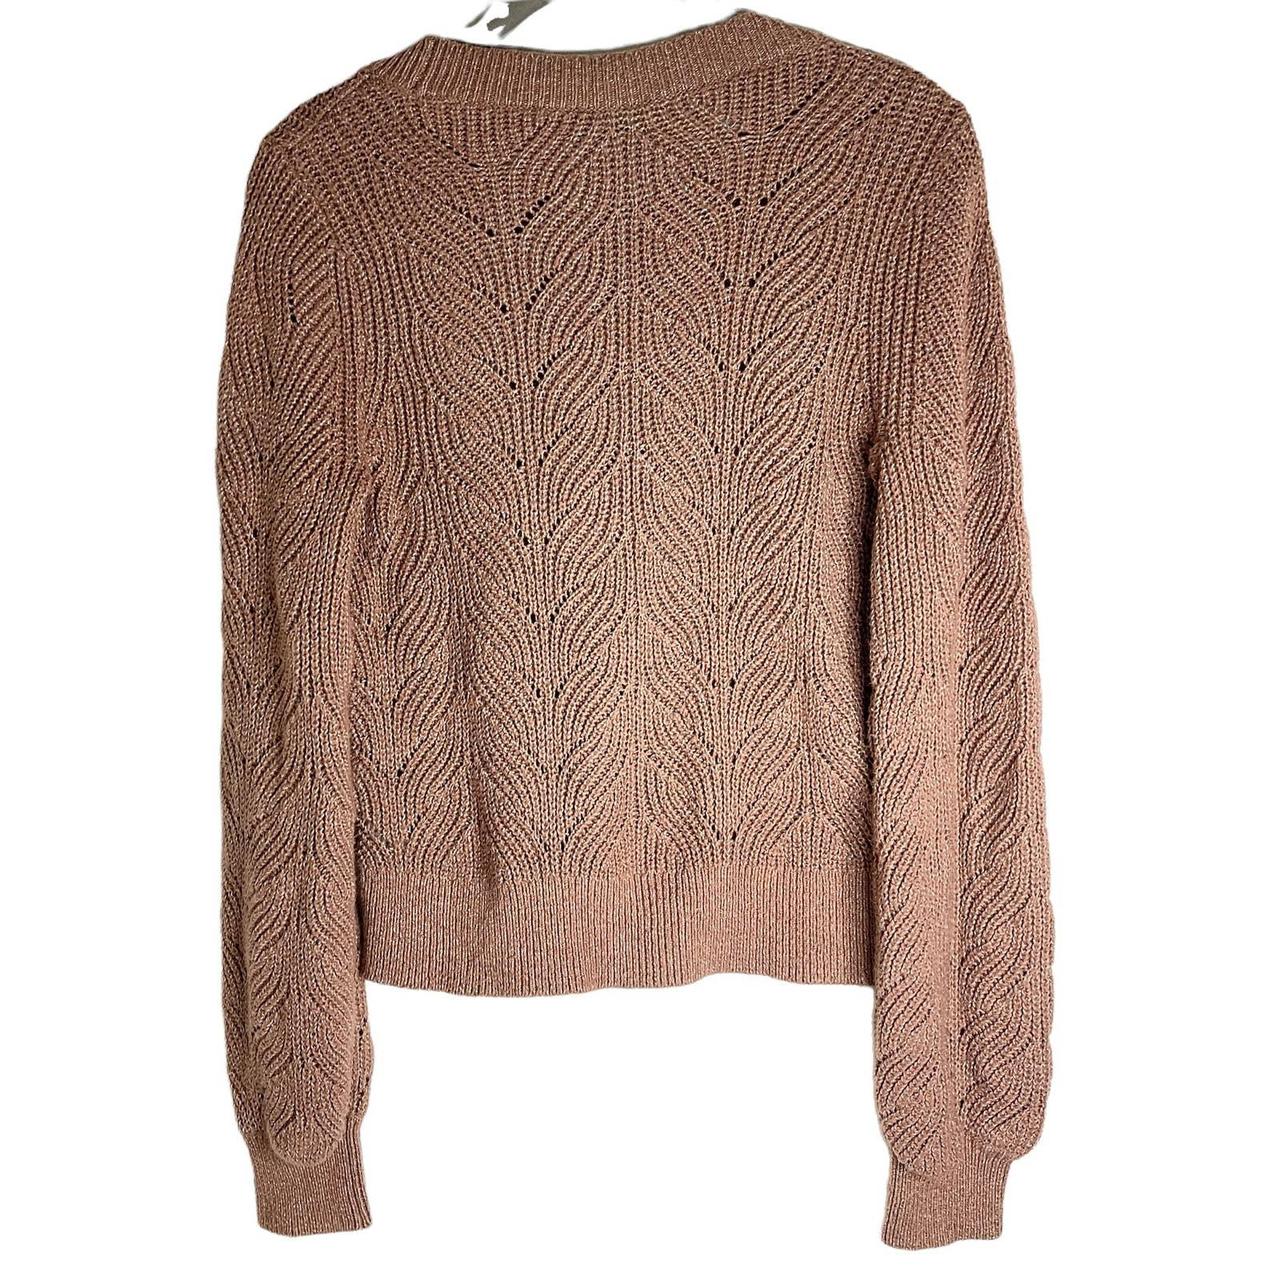 Abercrombie & Fitch Women's Brown Jumper (2)